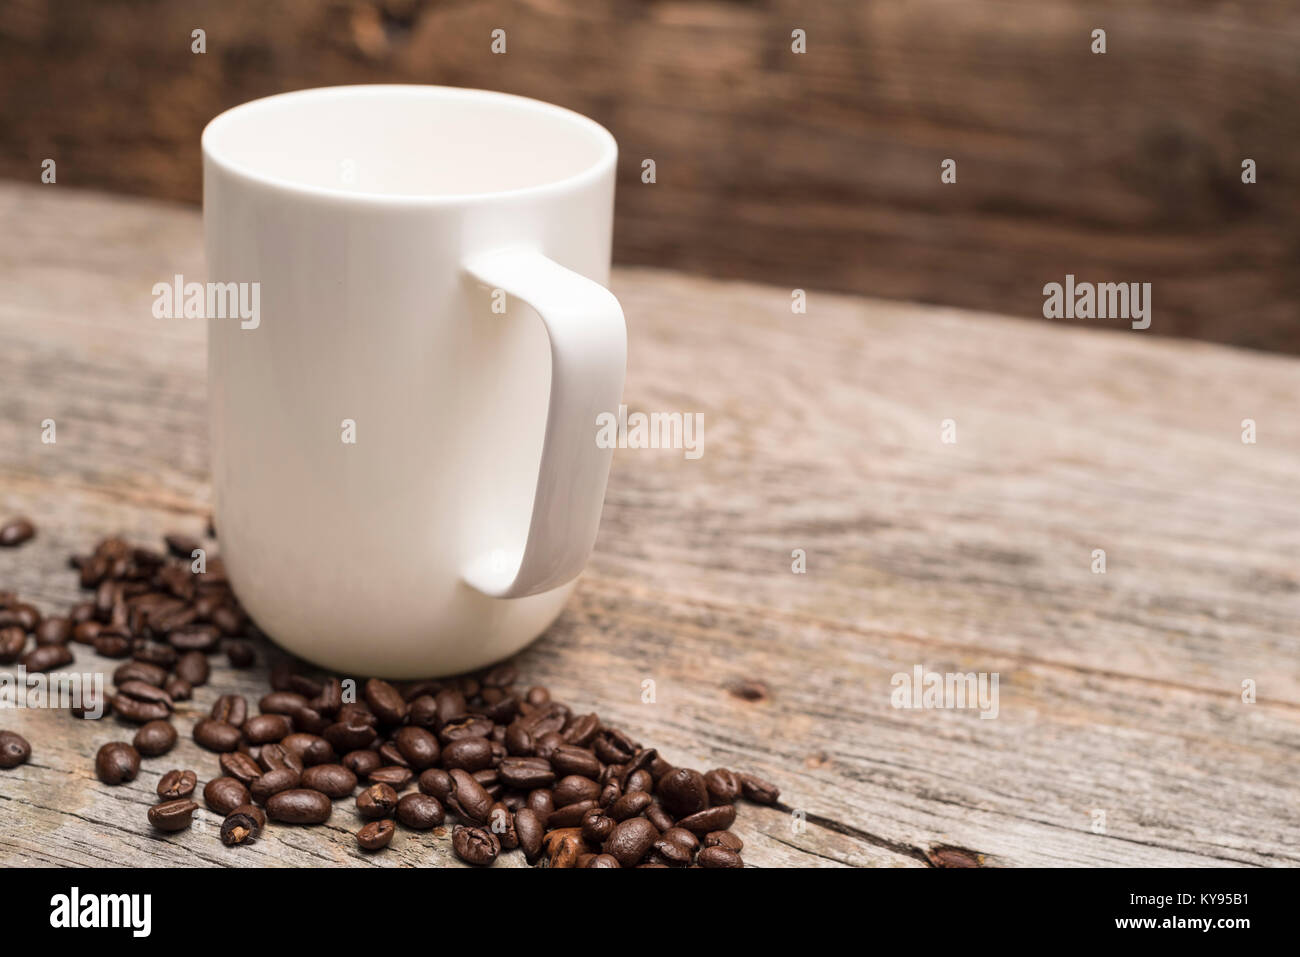 one large white coffee mug surrounded by roasted coffee beans shot against rustic brown barn wood background ready for next pour Stock Photo